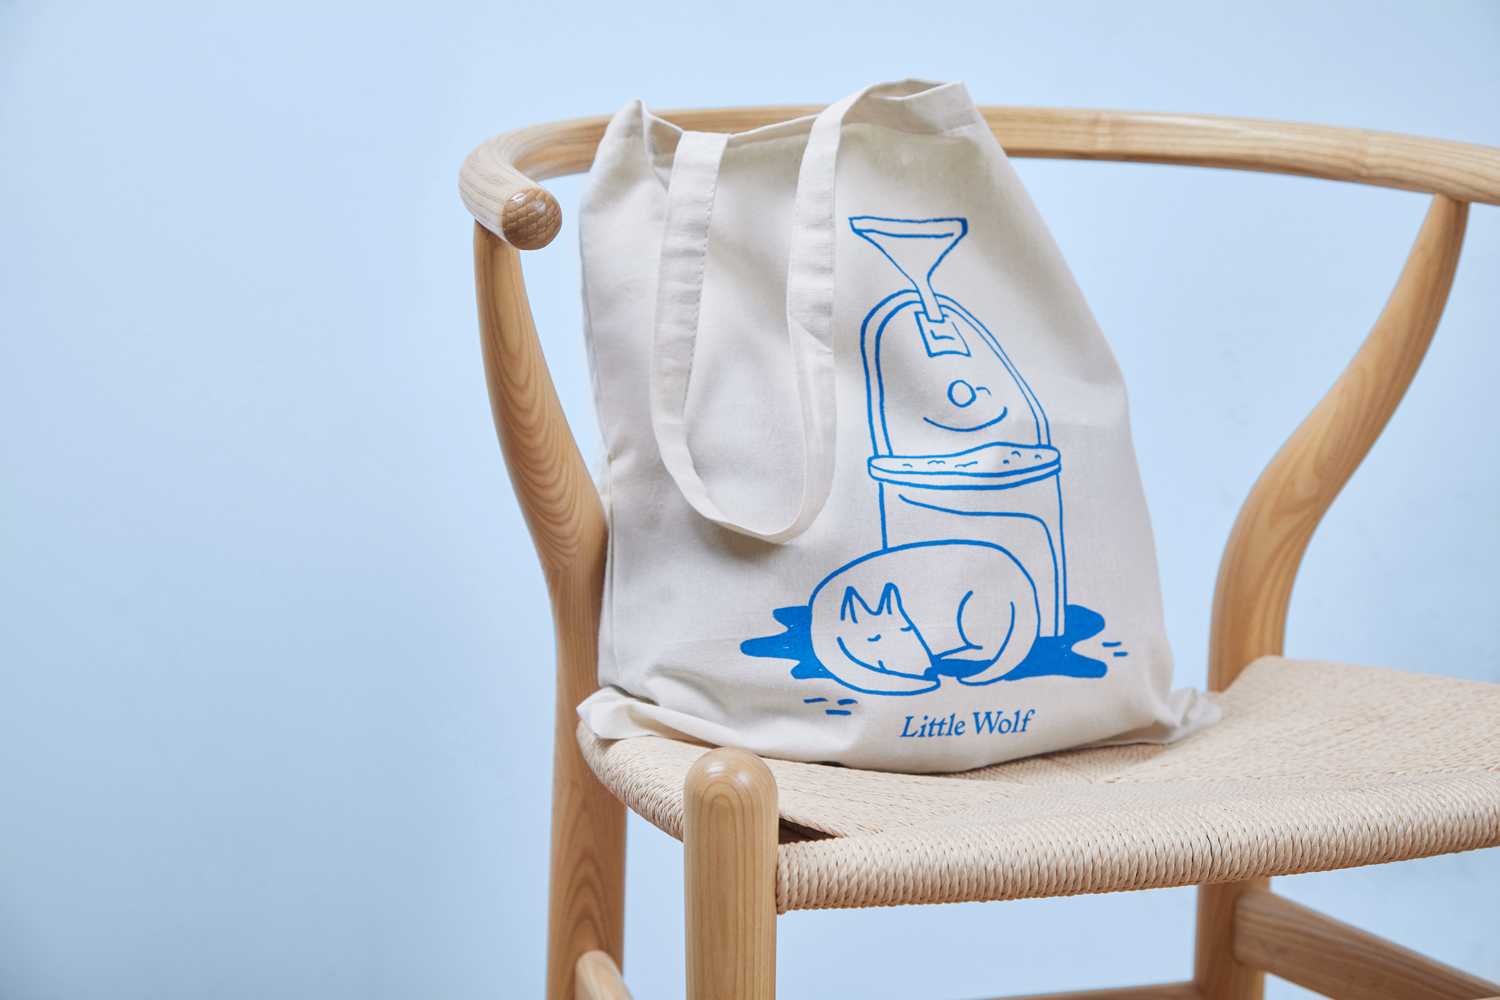 Graphic identity, illustration and tote bag by Perky Bros for American small-batch coffee roastery, subscription service and café Little Wolf